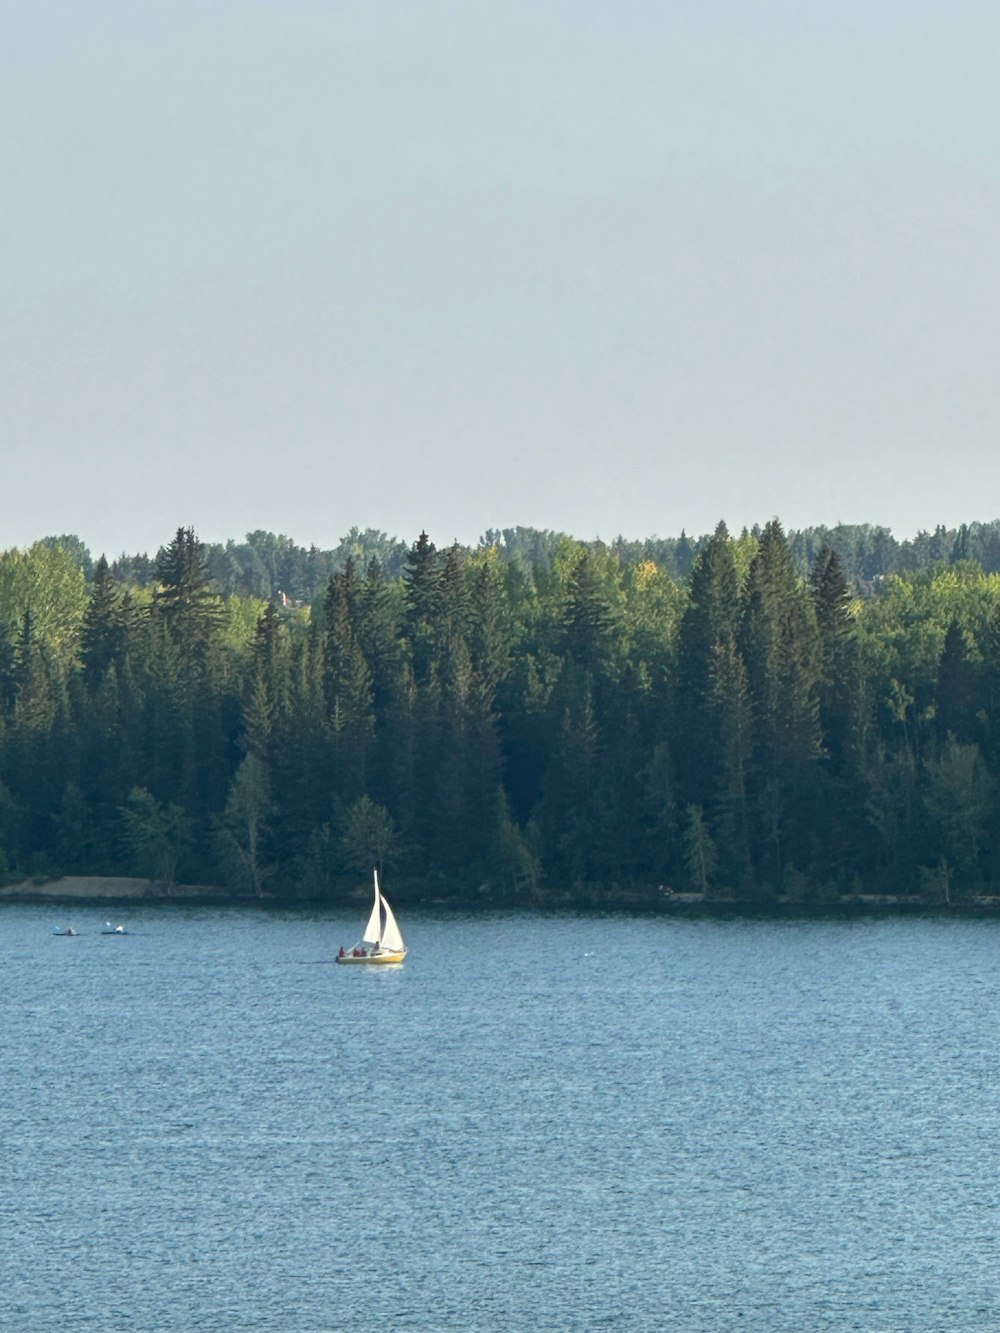 a sailboat on a lake with trees in the background